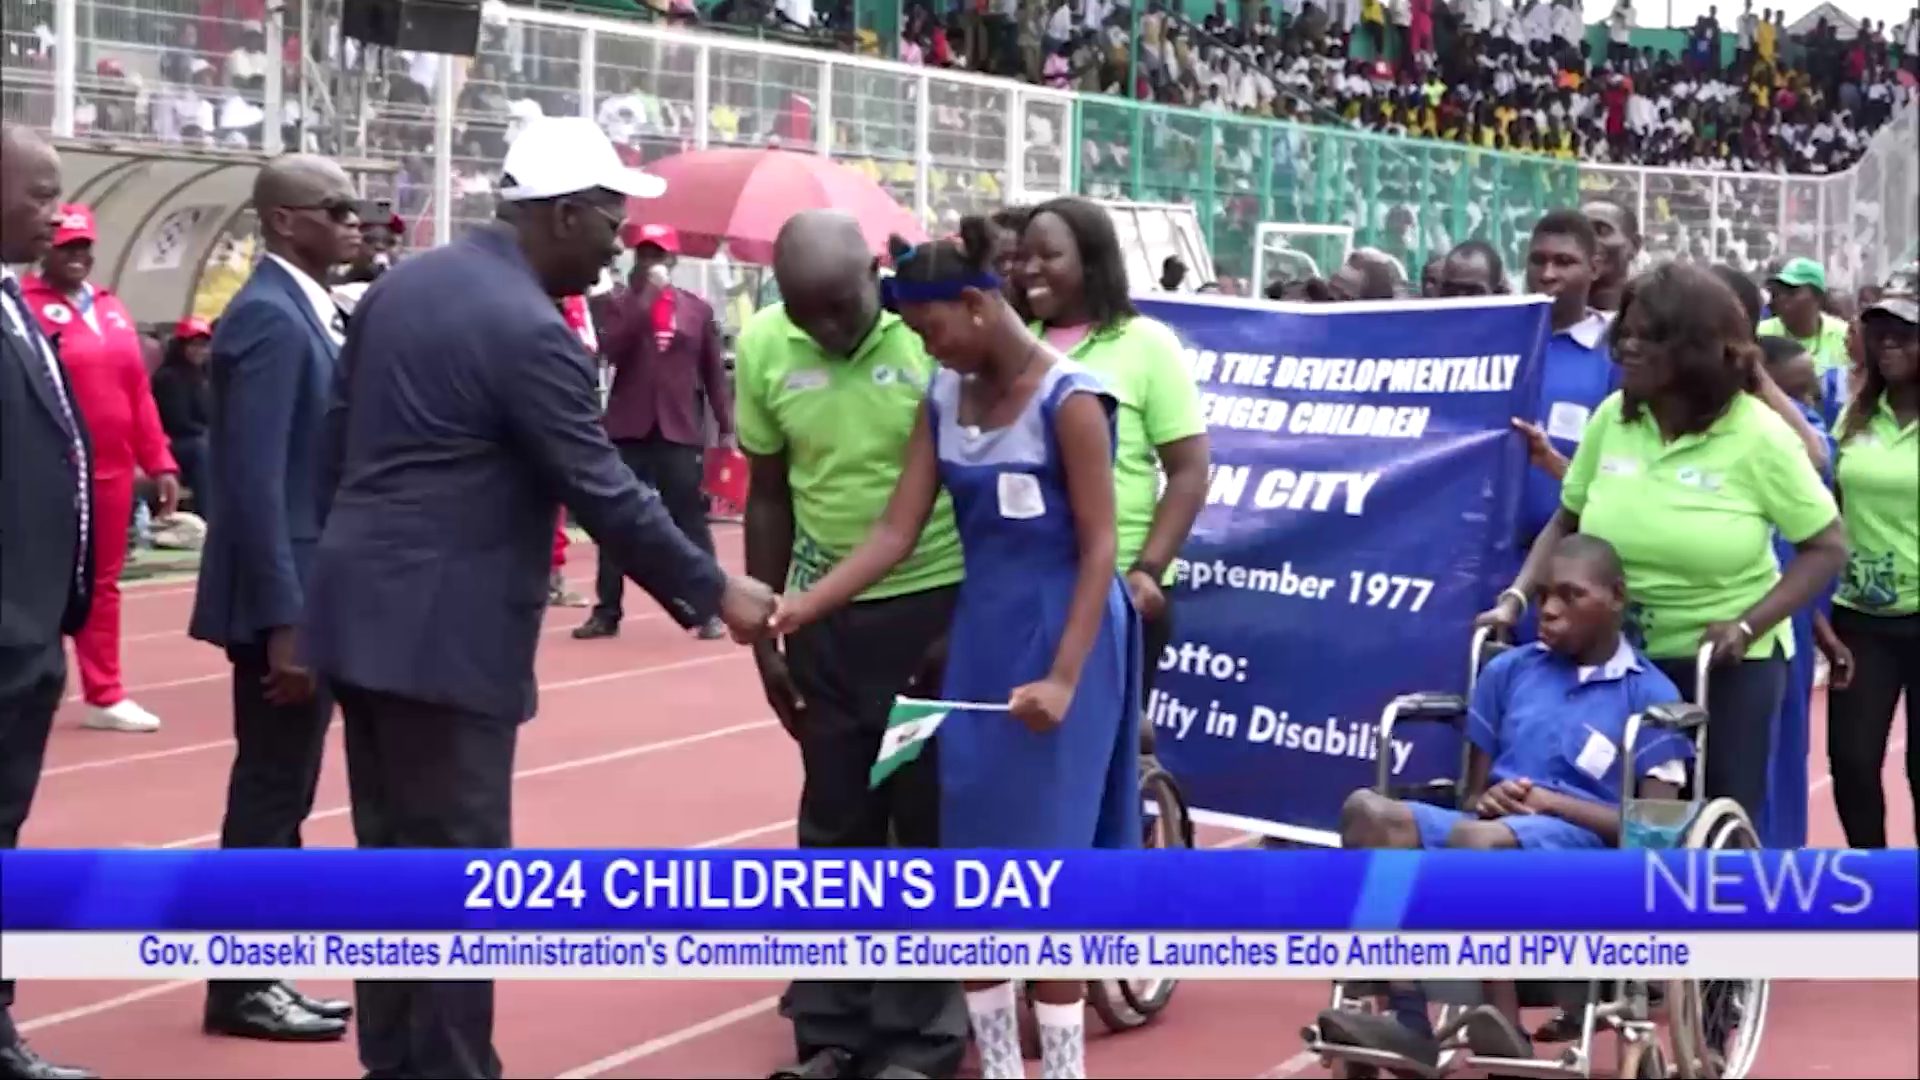 2024 CHILDREN’S DAY: Gov. Obaseki Restates Administration’s Commitment To Education As Wife Launches Edo Anthem And HPV Vaccine